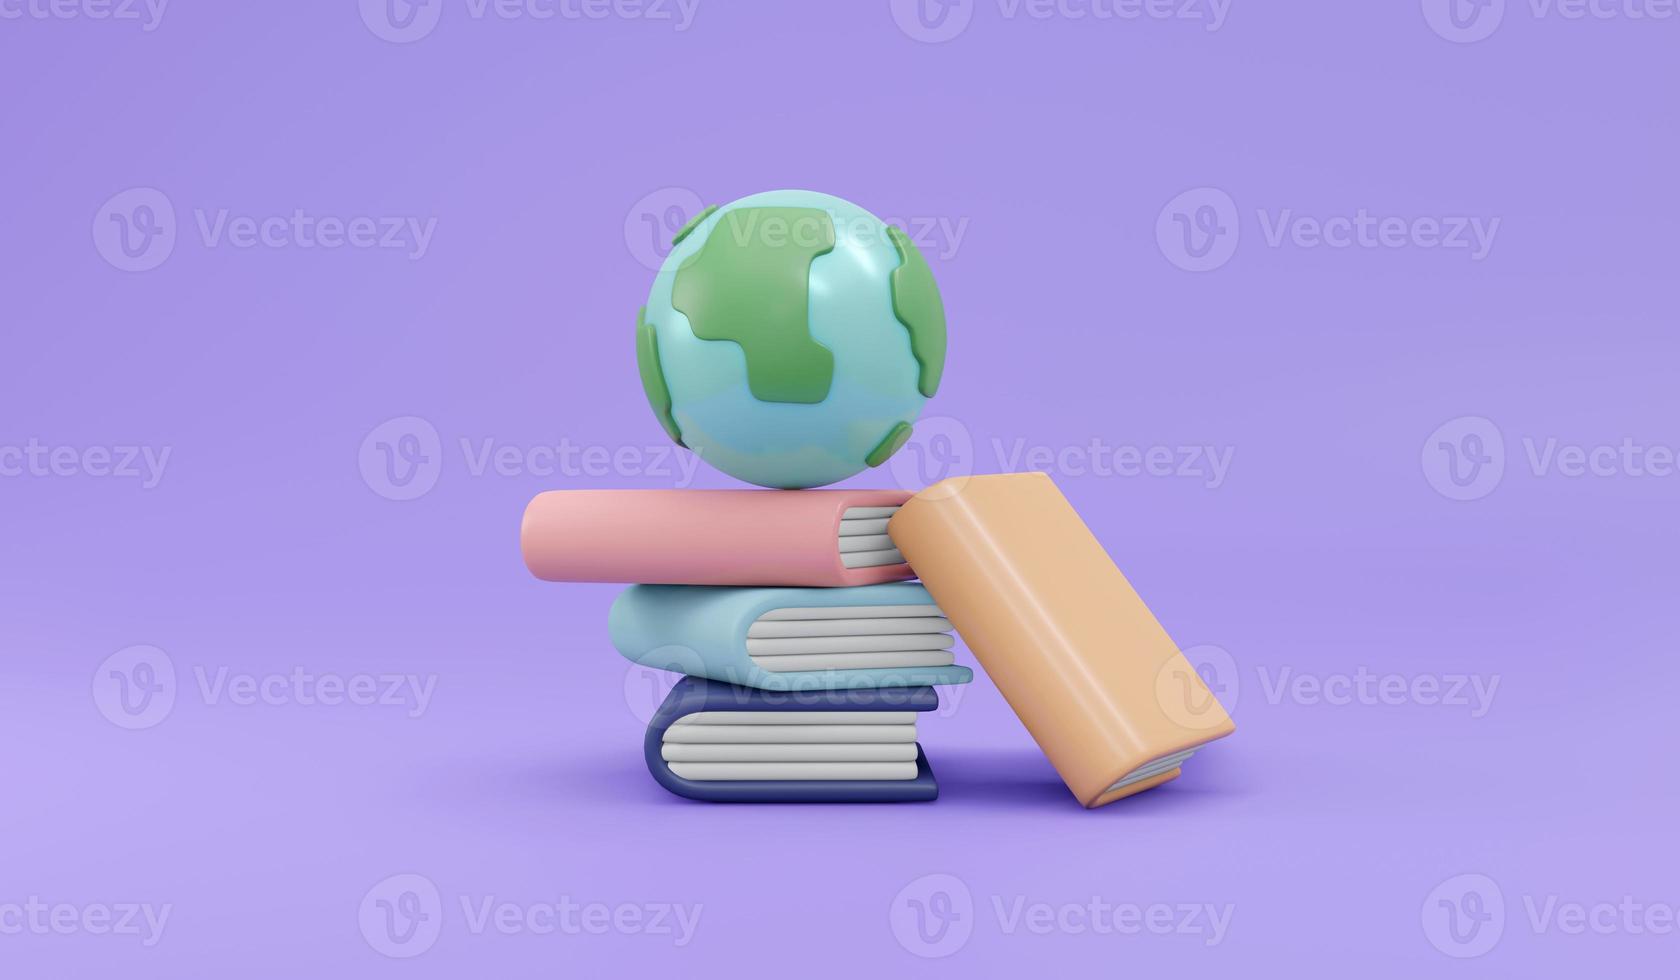 3D Rendering of Books and global icon. Template for background, banner, card, poster with text inscription concept of education. 3D Render illustration cartoon style. photo